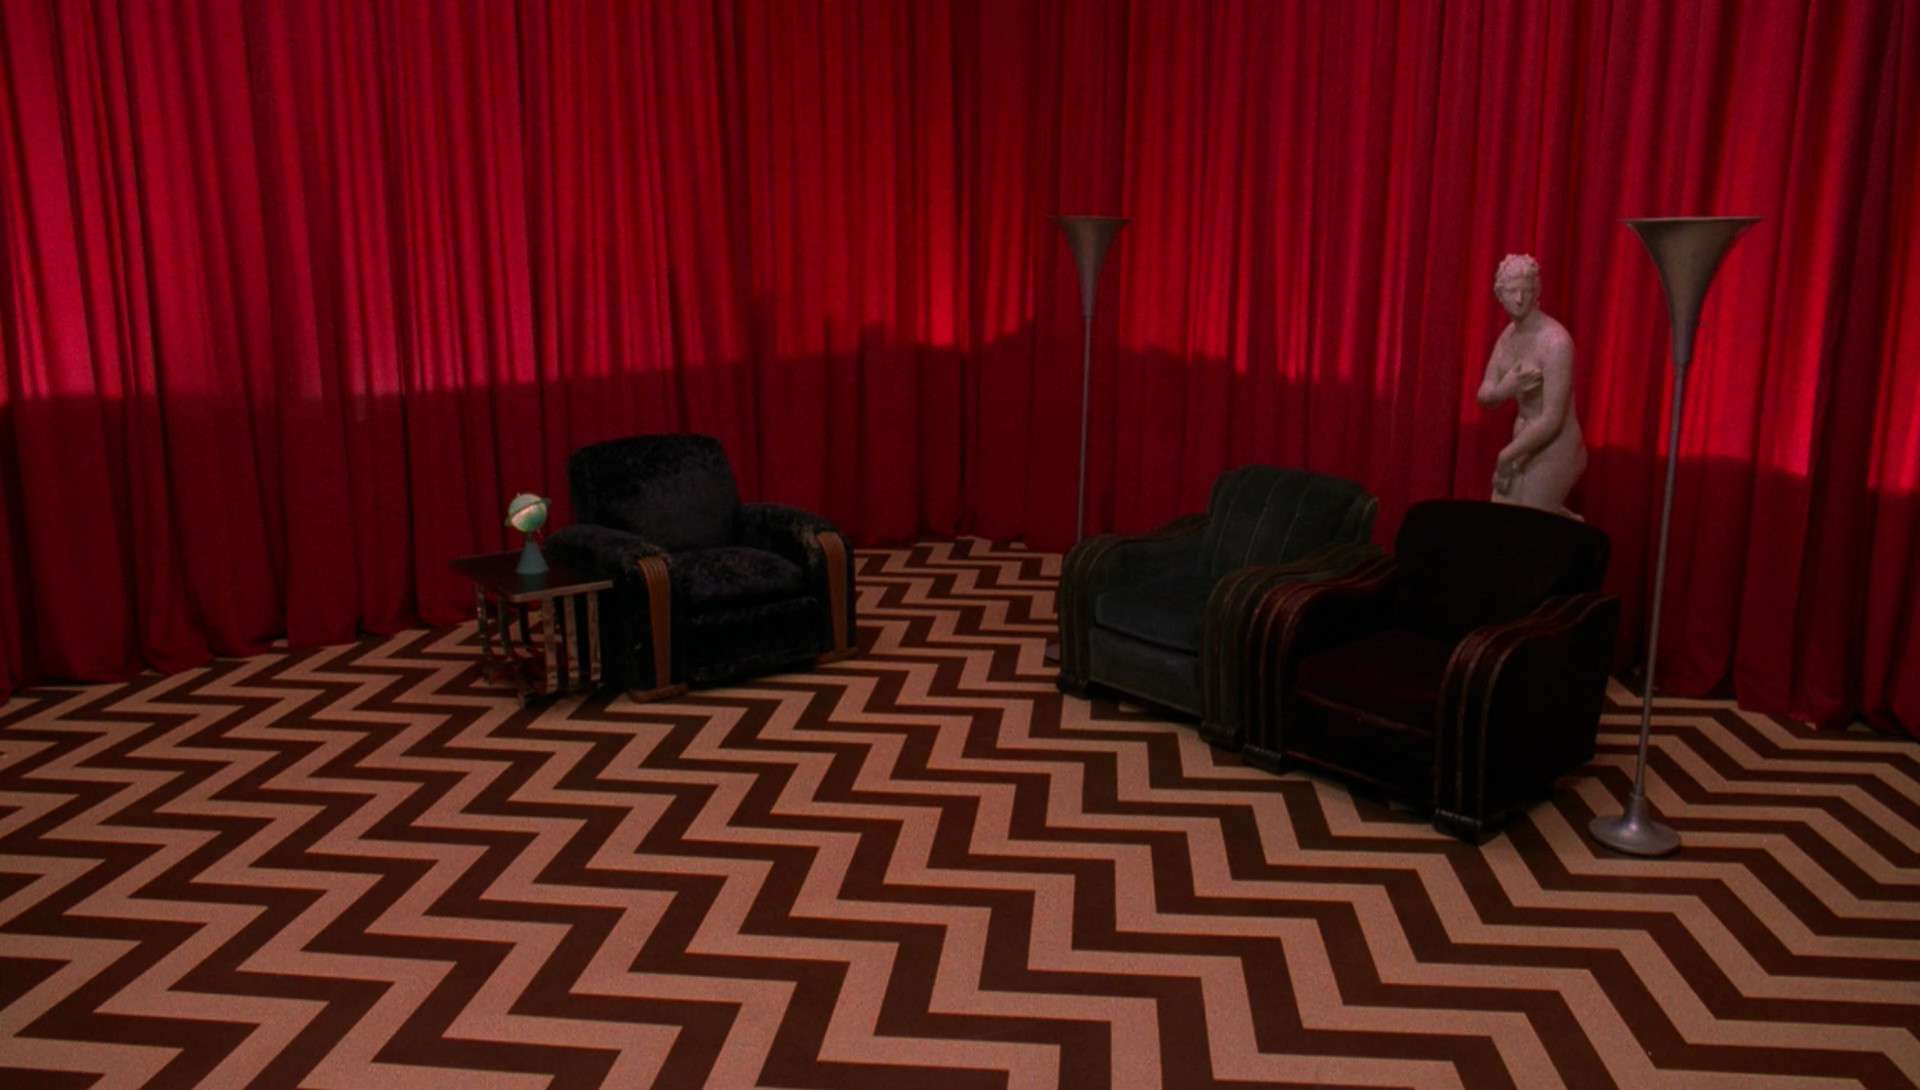 twin peaks wallpaper,red,interior design,room,curtain,stage